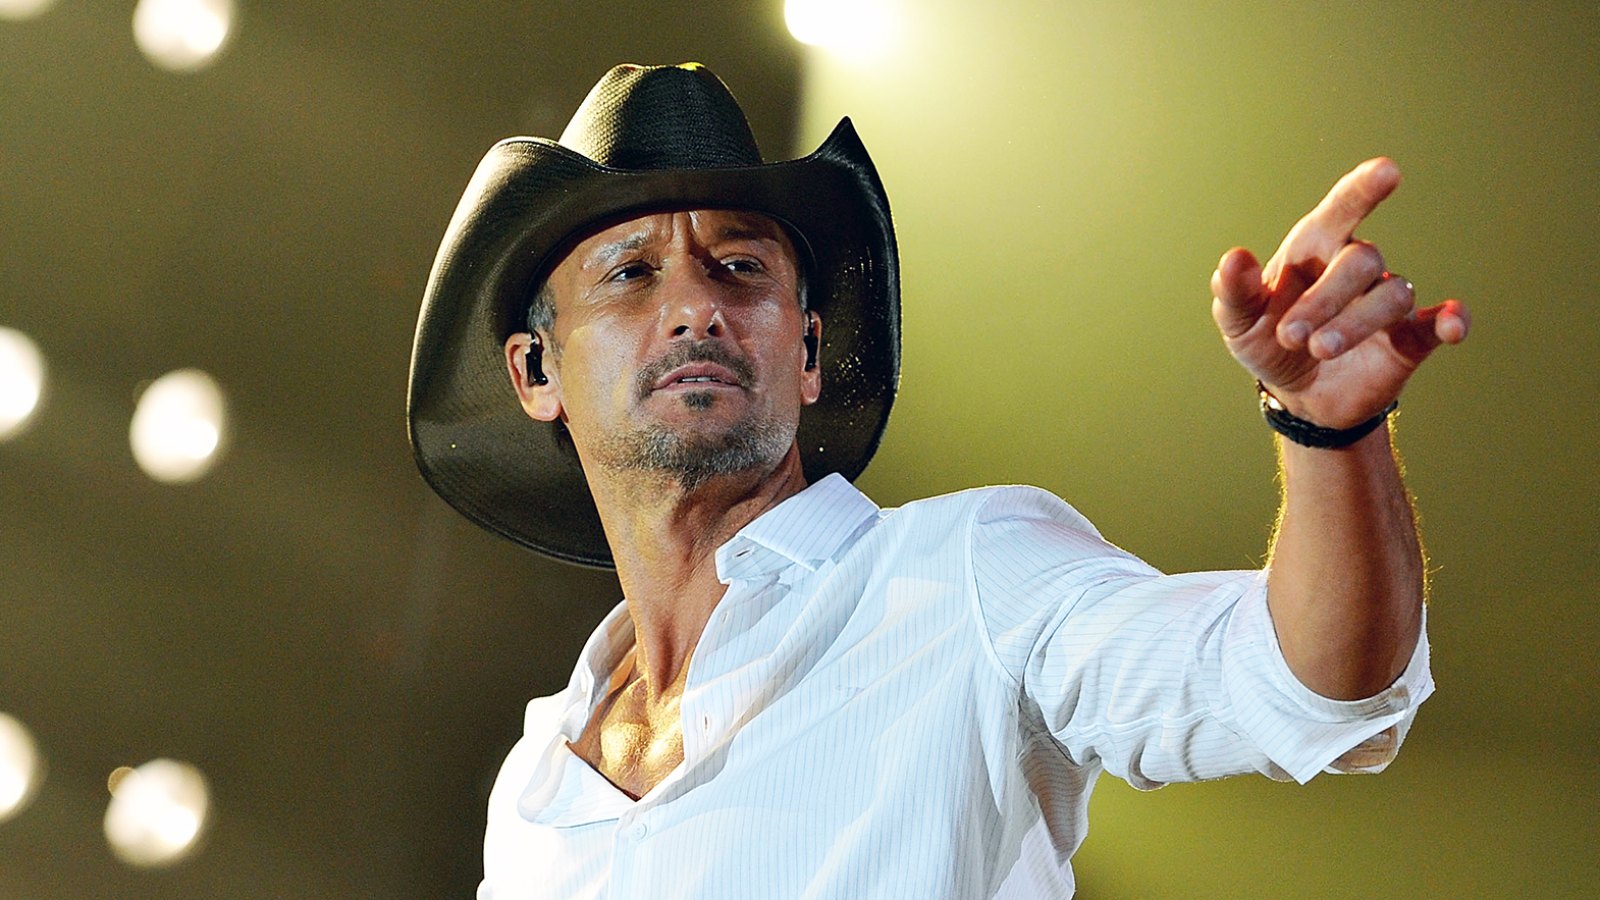 Tim McGraw Returns to U.S. After Dublin Concert Collapse